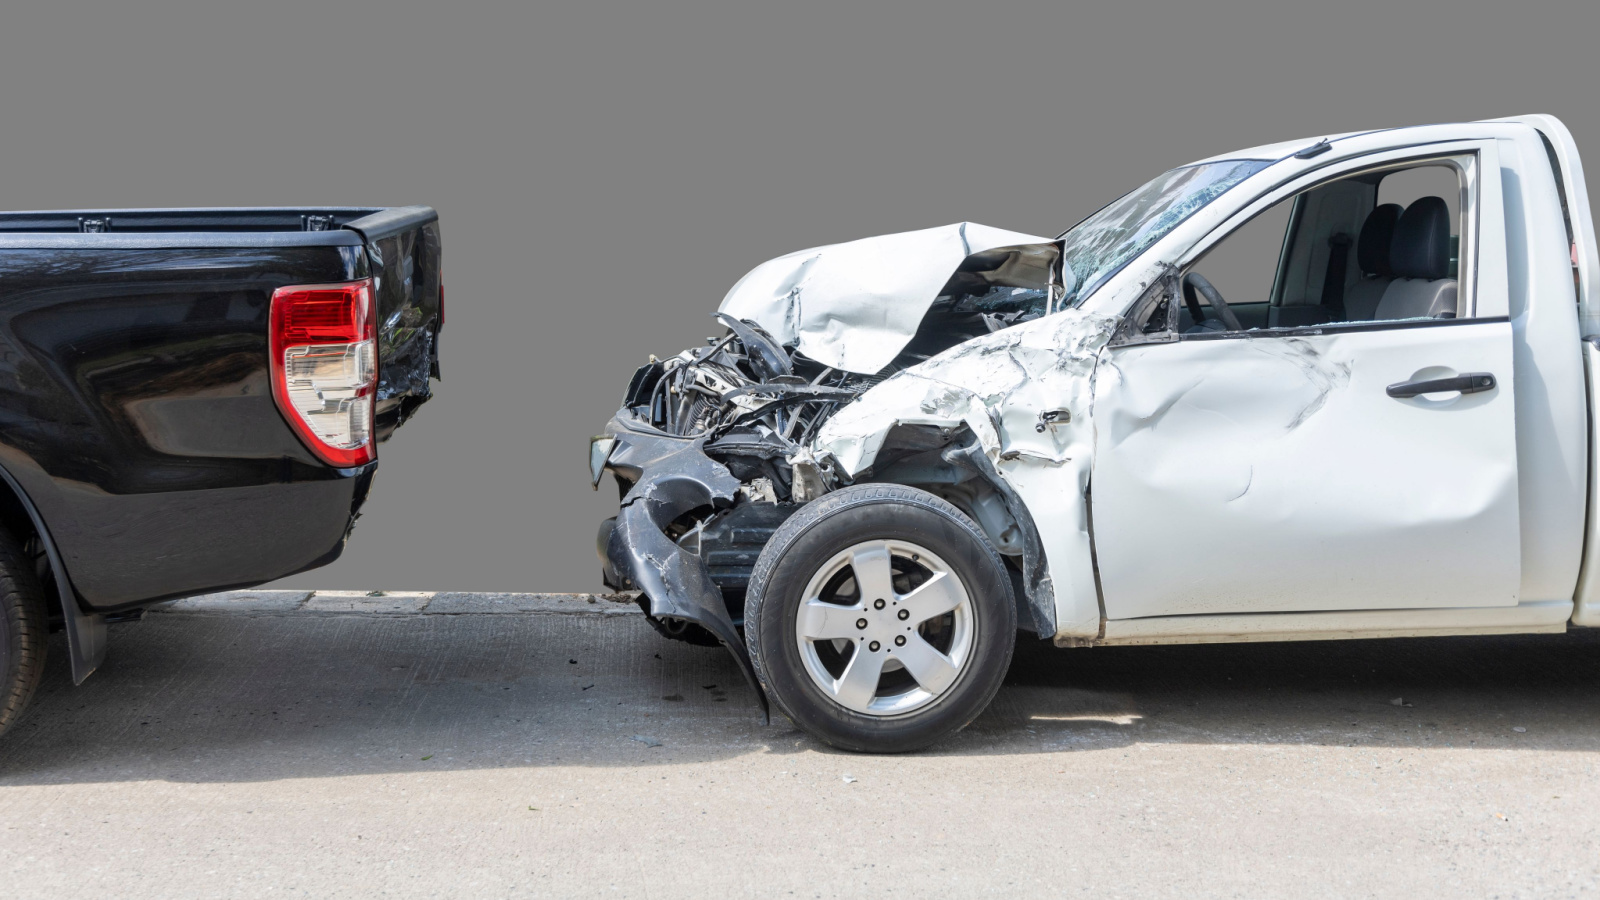 Backup Accident Lawyers St. Louis | Missouri and Illinois Auto Accident Law Firm | Personal Injury Attorneys Near Me